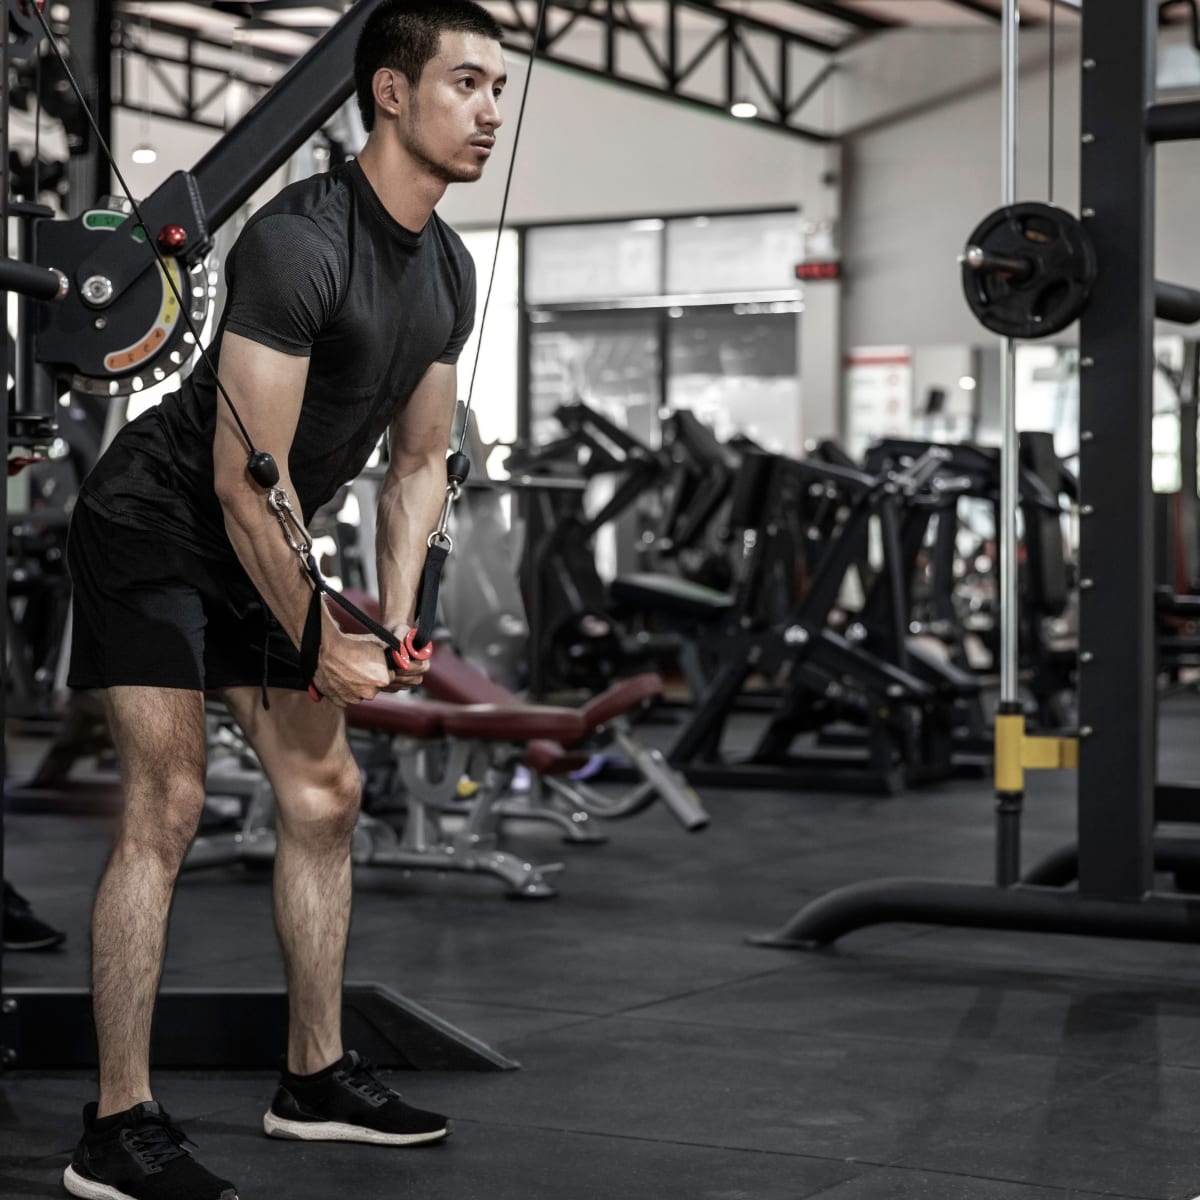 10 Men's Gym Clothes That Will Help Your Workout - Men's Journal